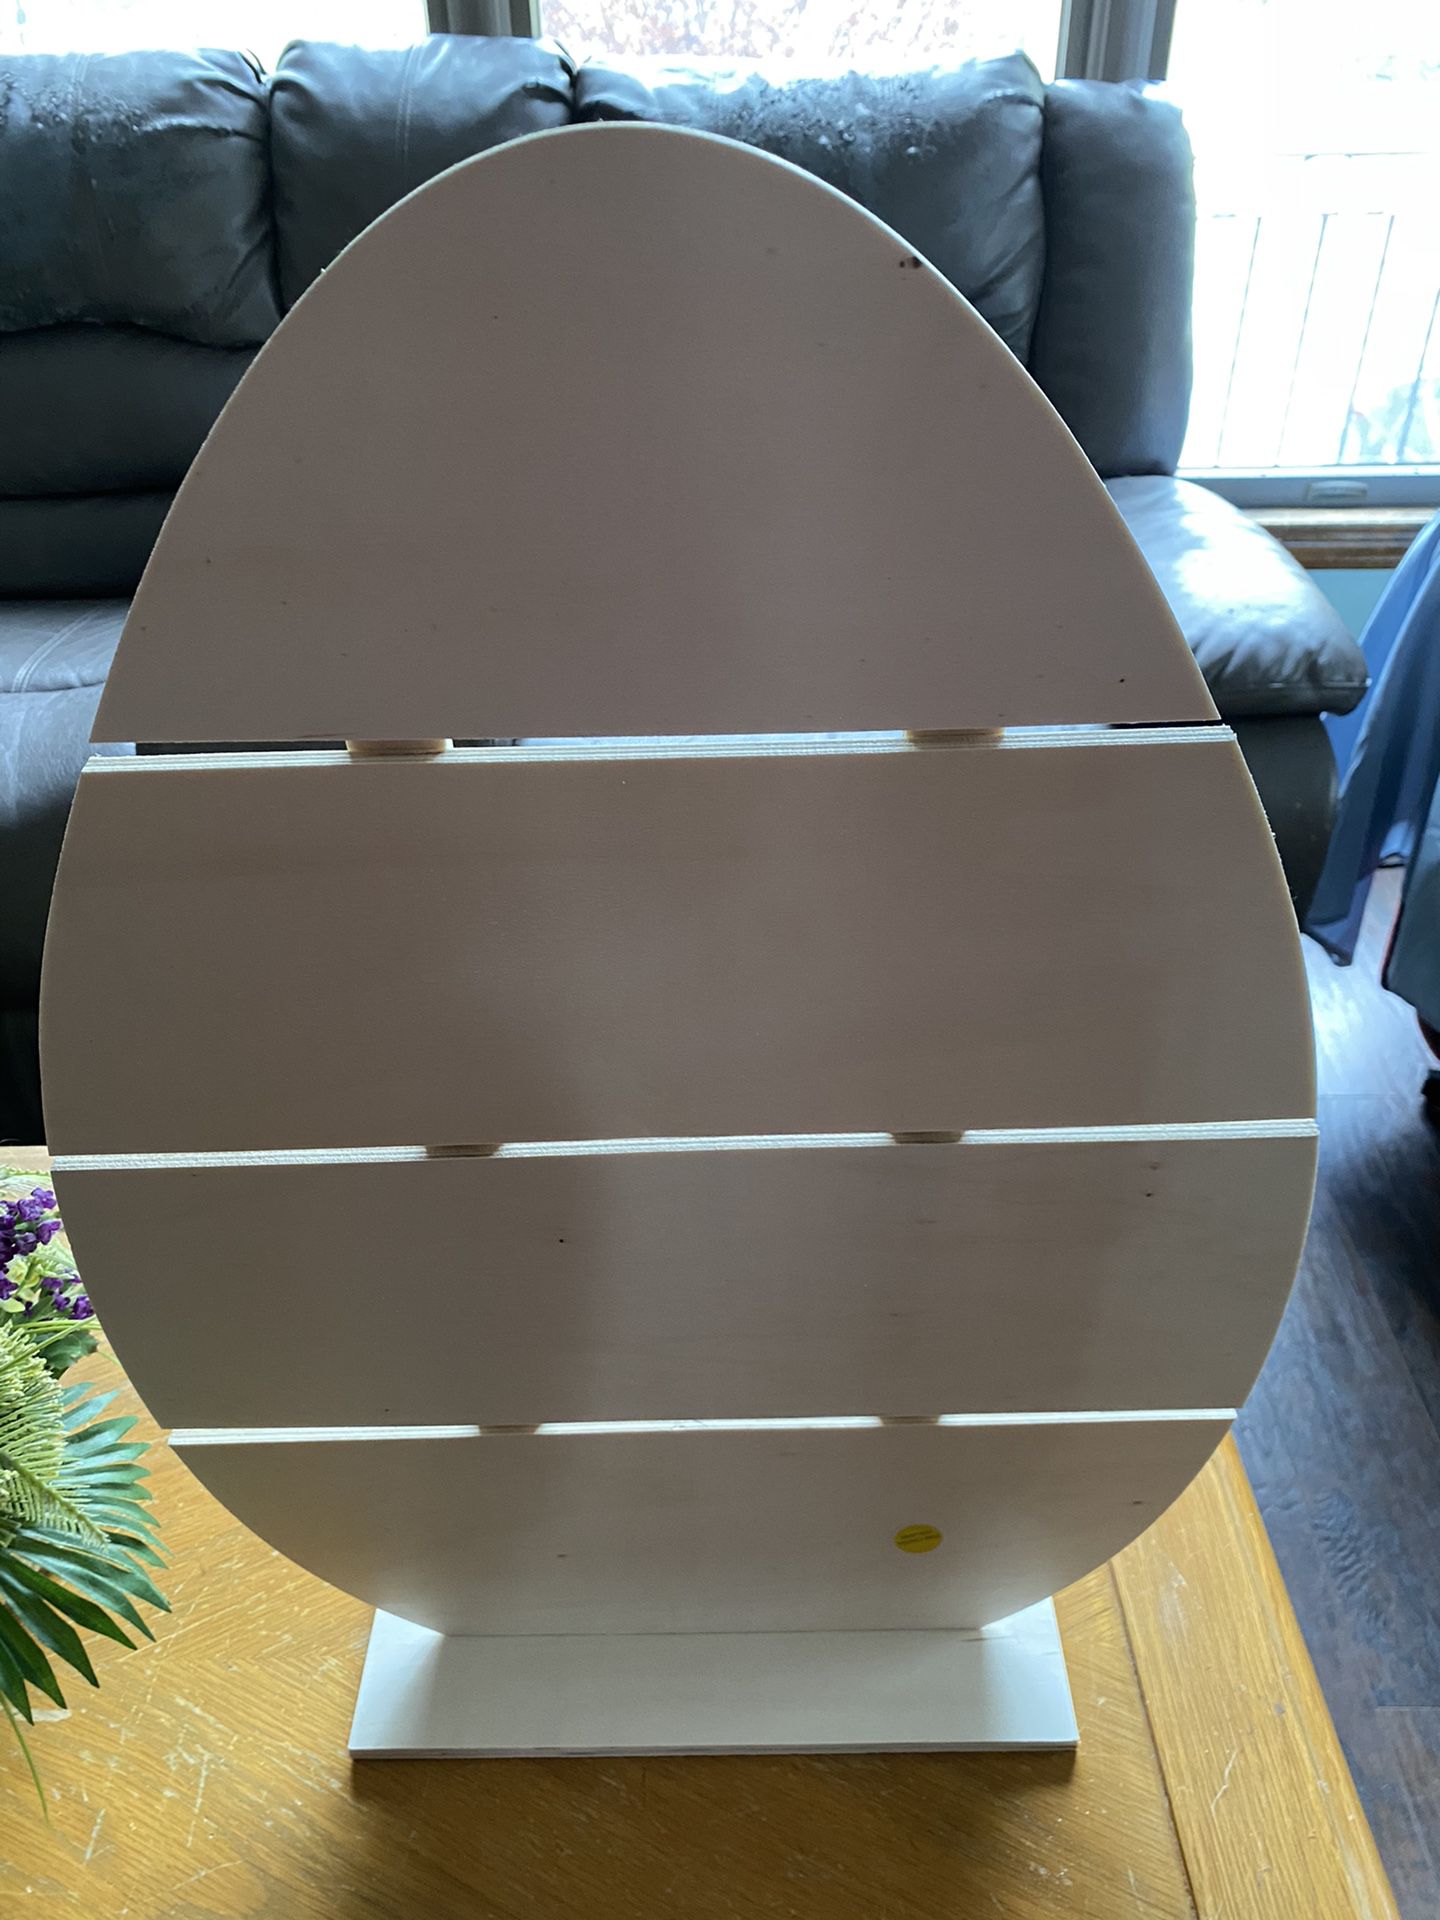 Large Wooden Easter Egg - New And Unpainted 